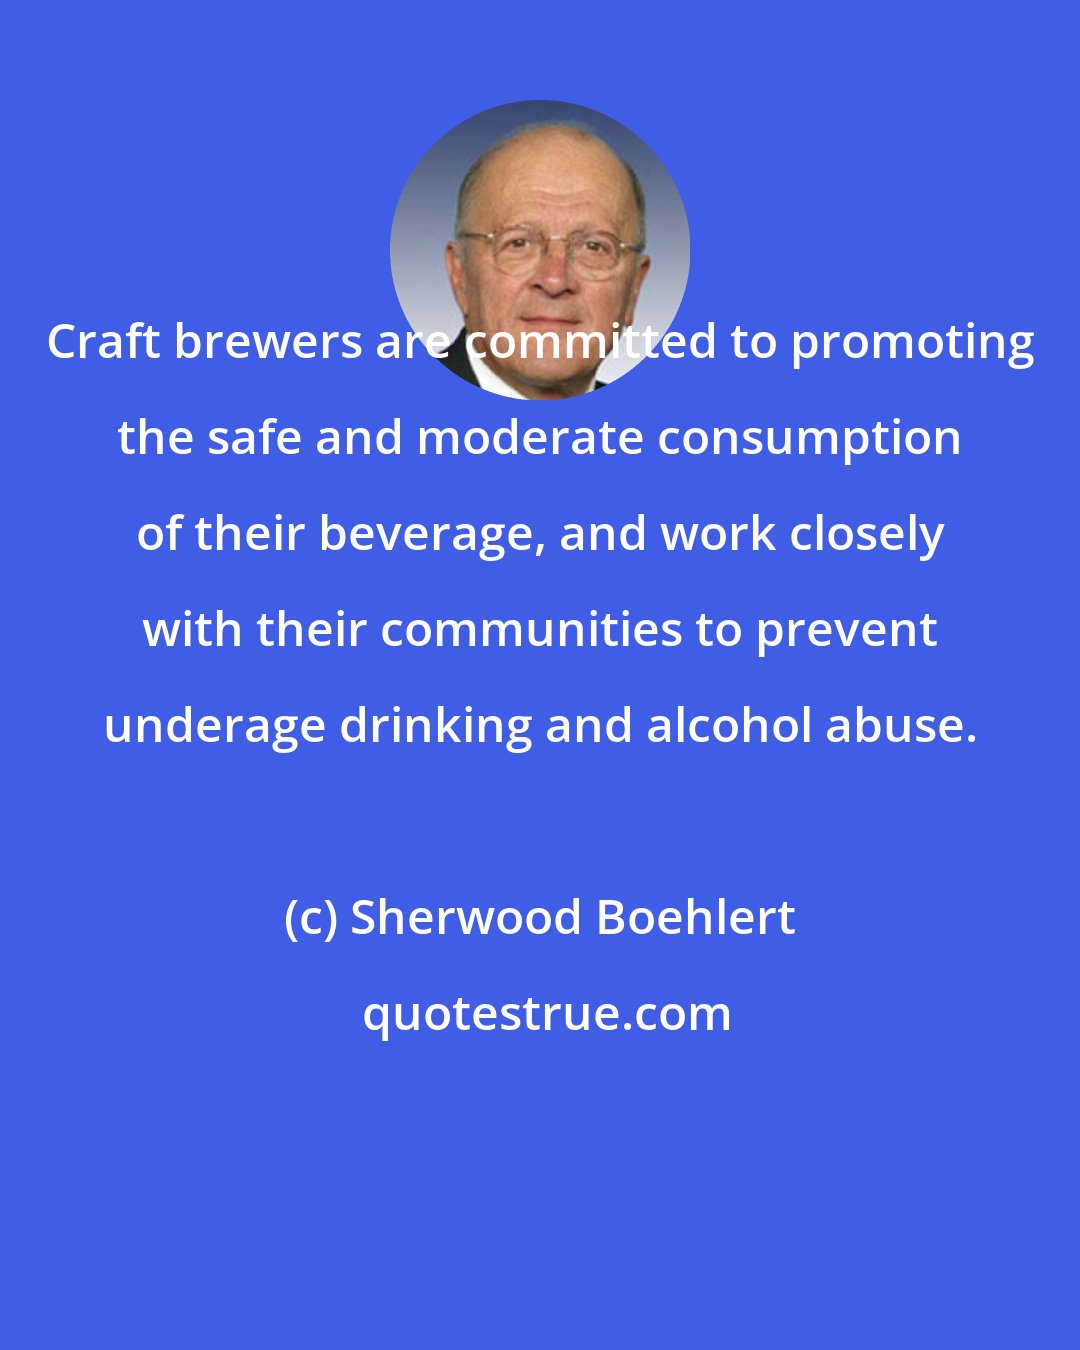 Sherwood Boehlert: Craft brewers are committed to promoting the safe and moderate consumption of their beverage, and work closely with their communities to prevent underage drinking and alcohol abuse.